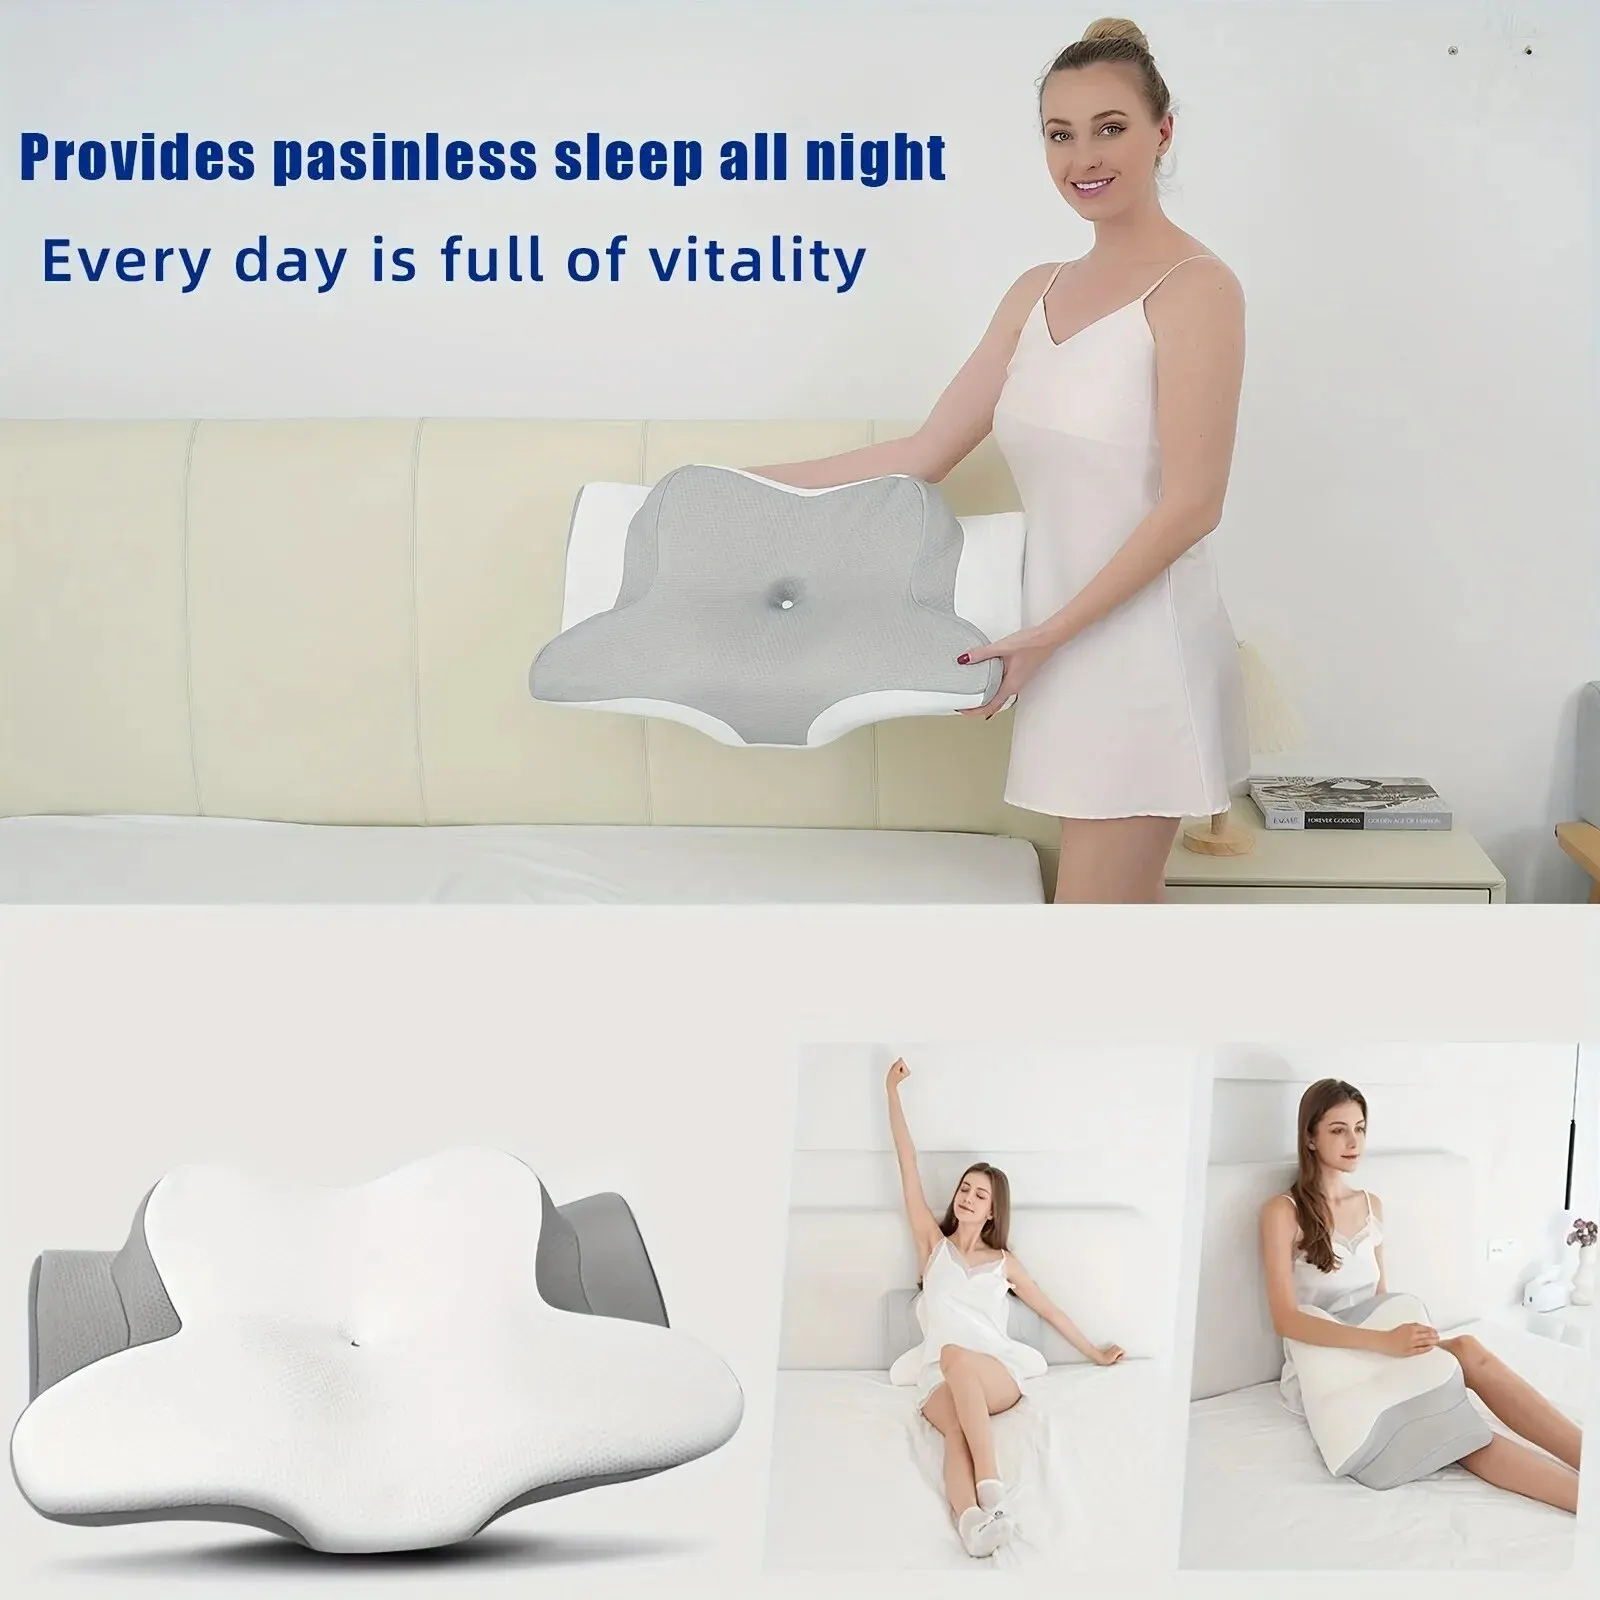 kf-S28b05fbc17404c5fad434c4d00f17c9b0-Memory-Foam-Pillows-Butterfly-Shaped-Relaxing-Cervical-Slow-Rebound-Neck-Pillow-Pain-Relief-Sleeping-Orthopedic-Pillow